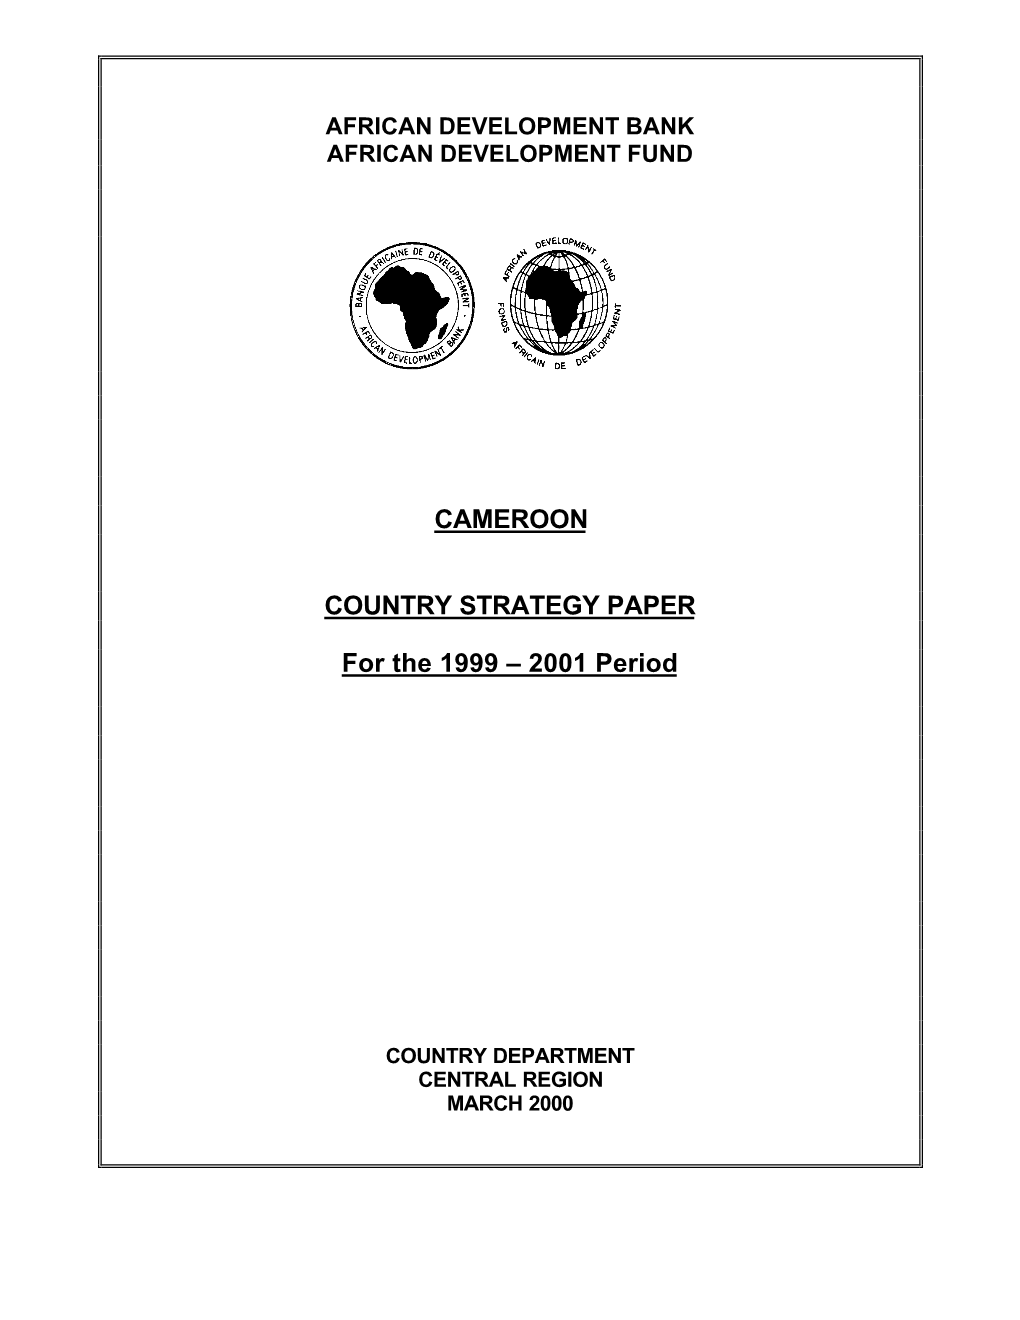 Cameroon Country Strategy Paper for the 1999-2001 Period